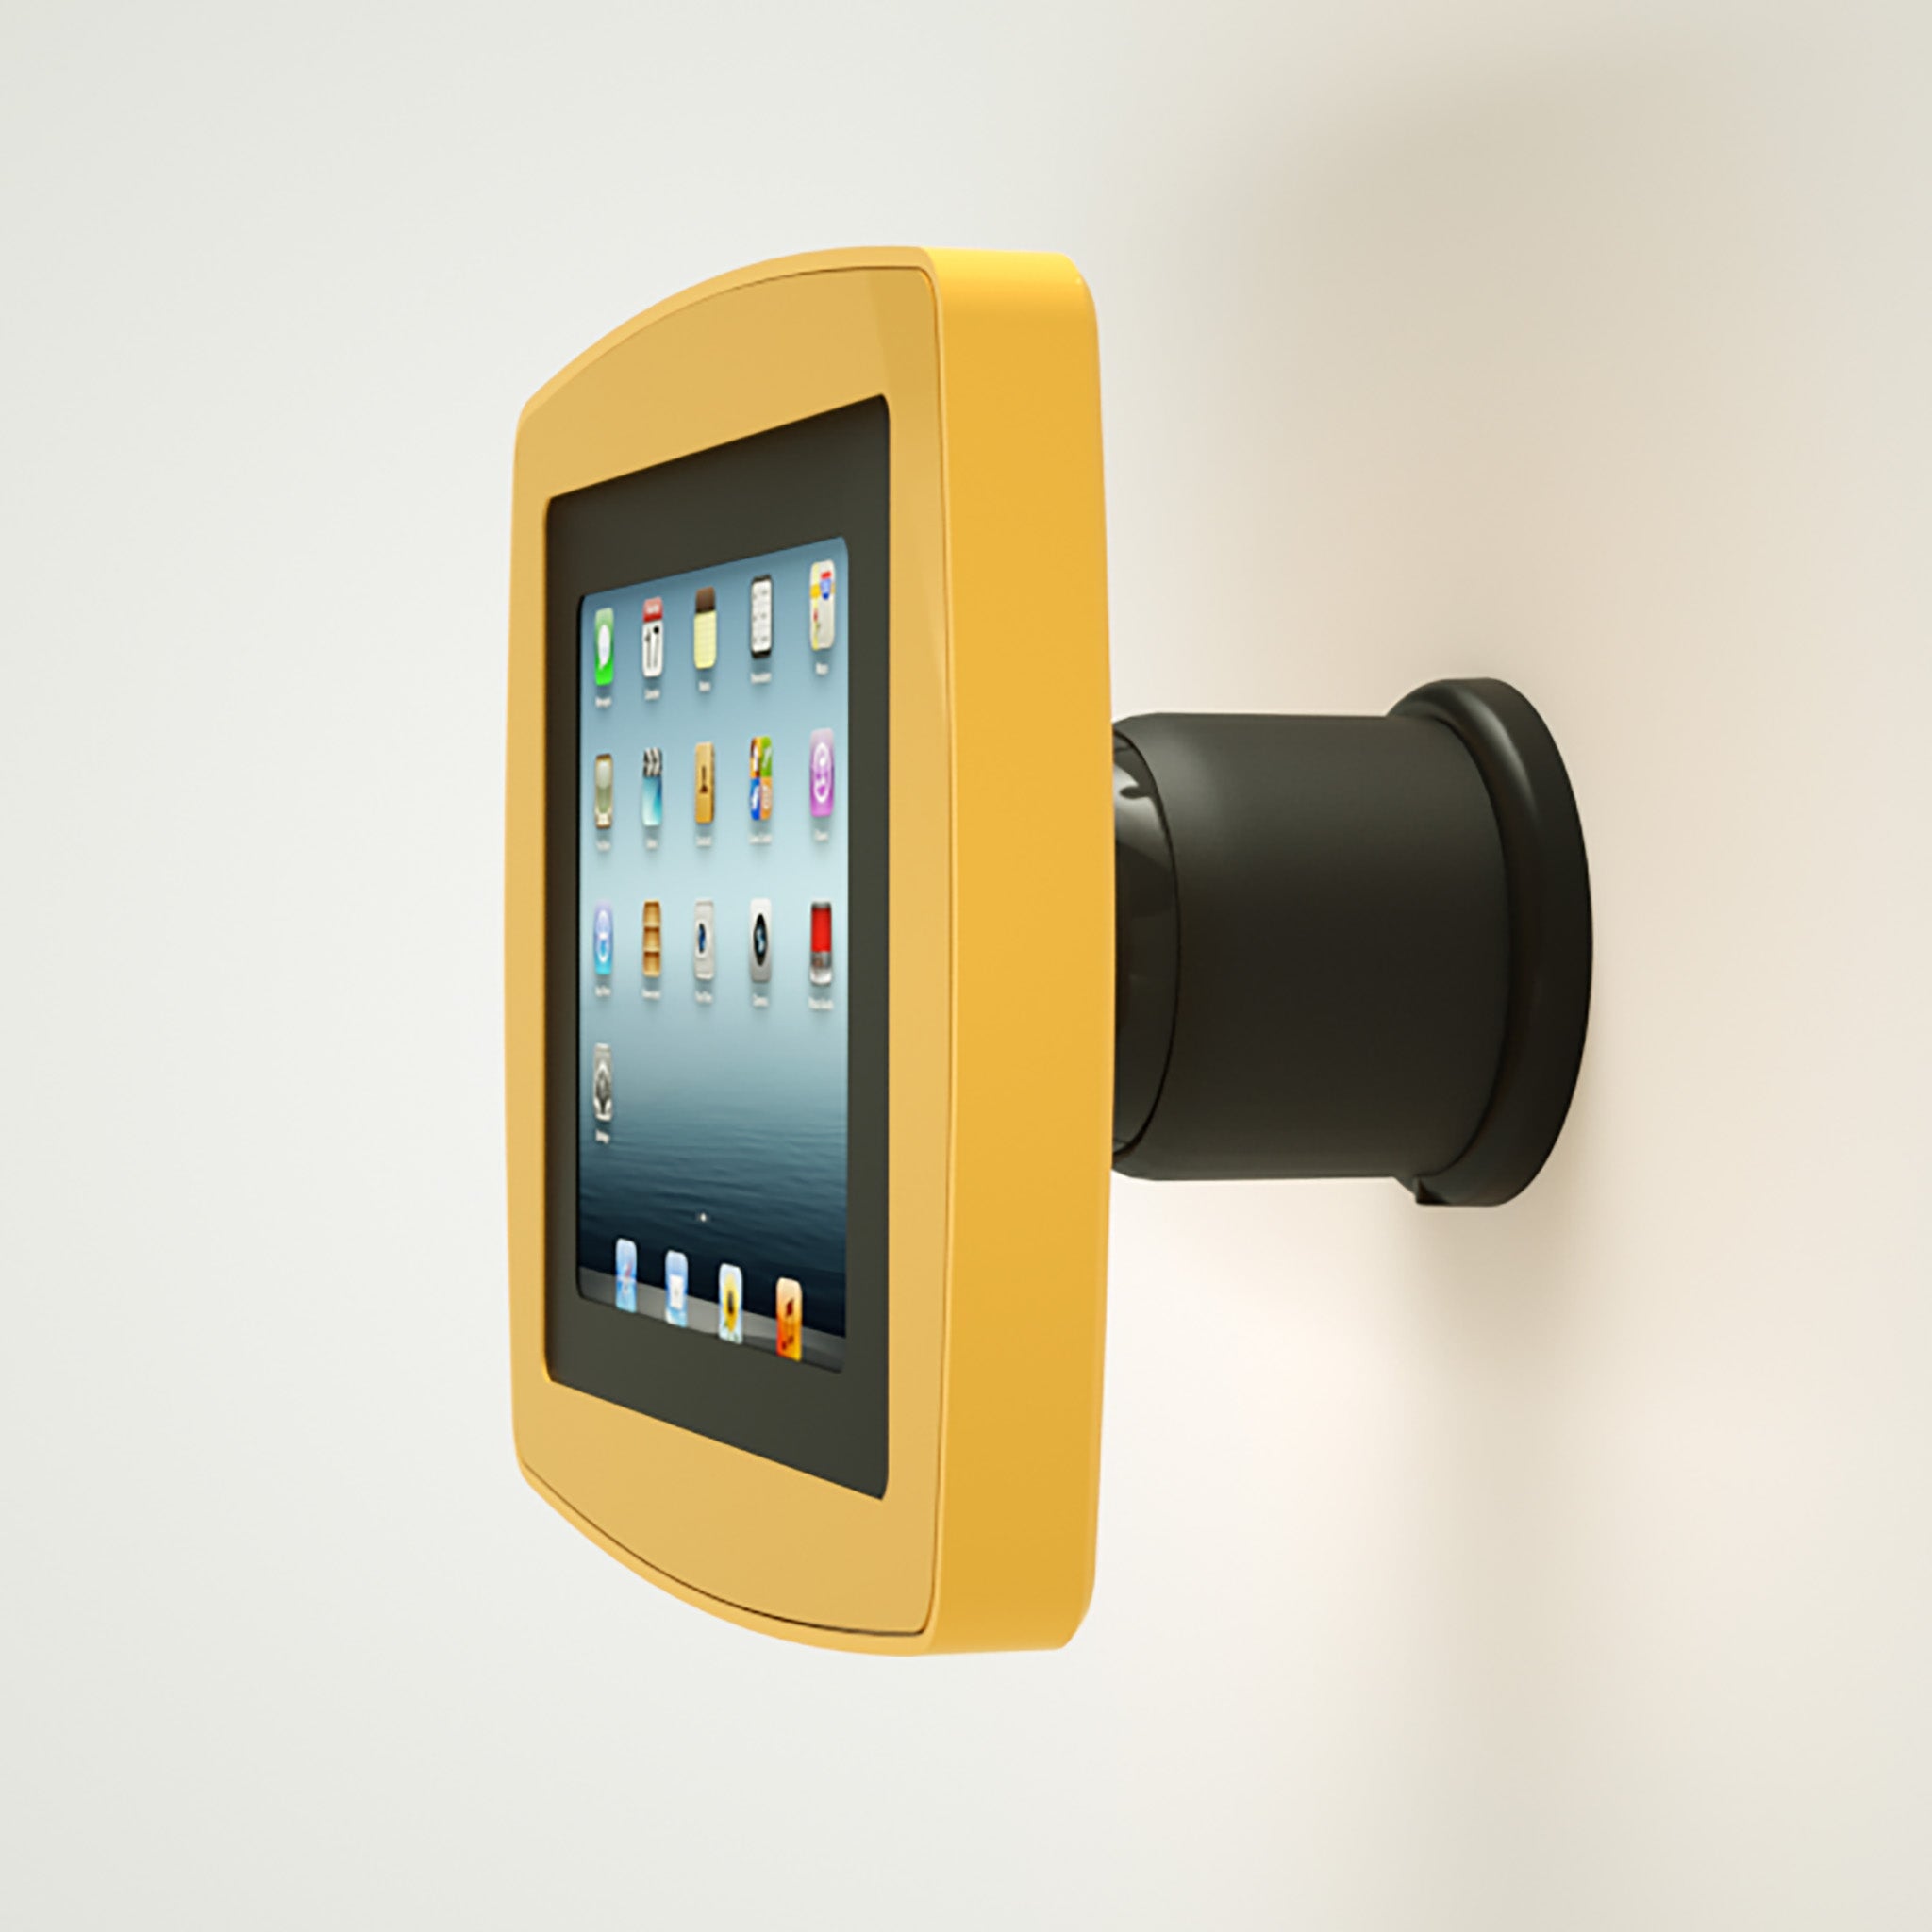 Armodilo Tilt Wall Mounted iPad & Tablet Enclosure in yellow